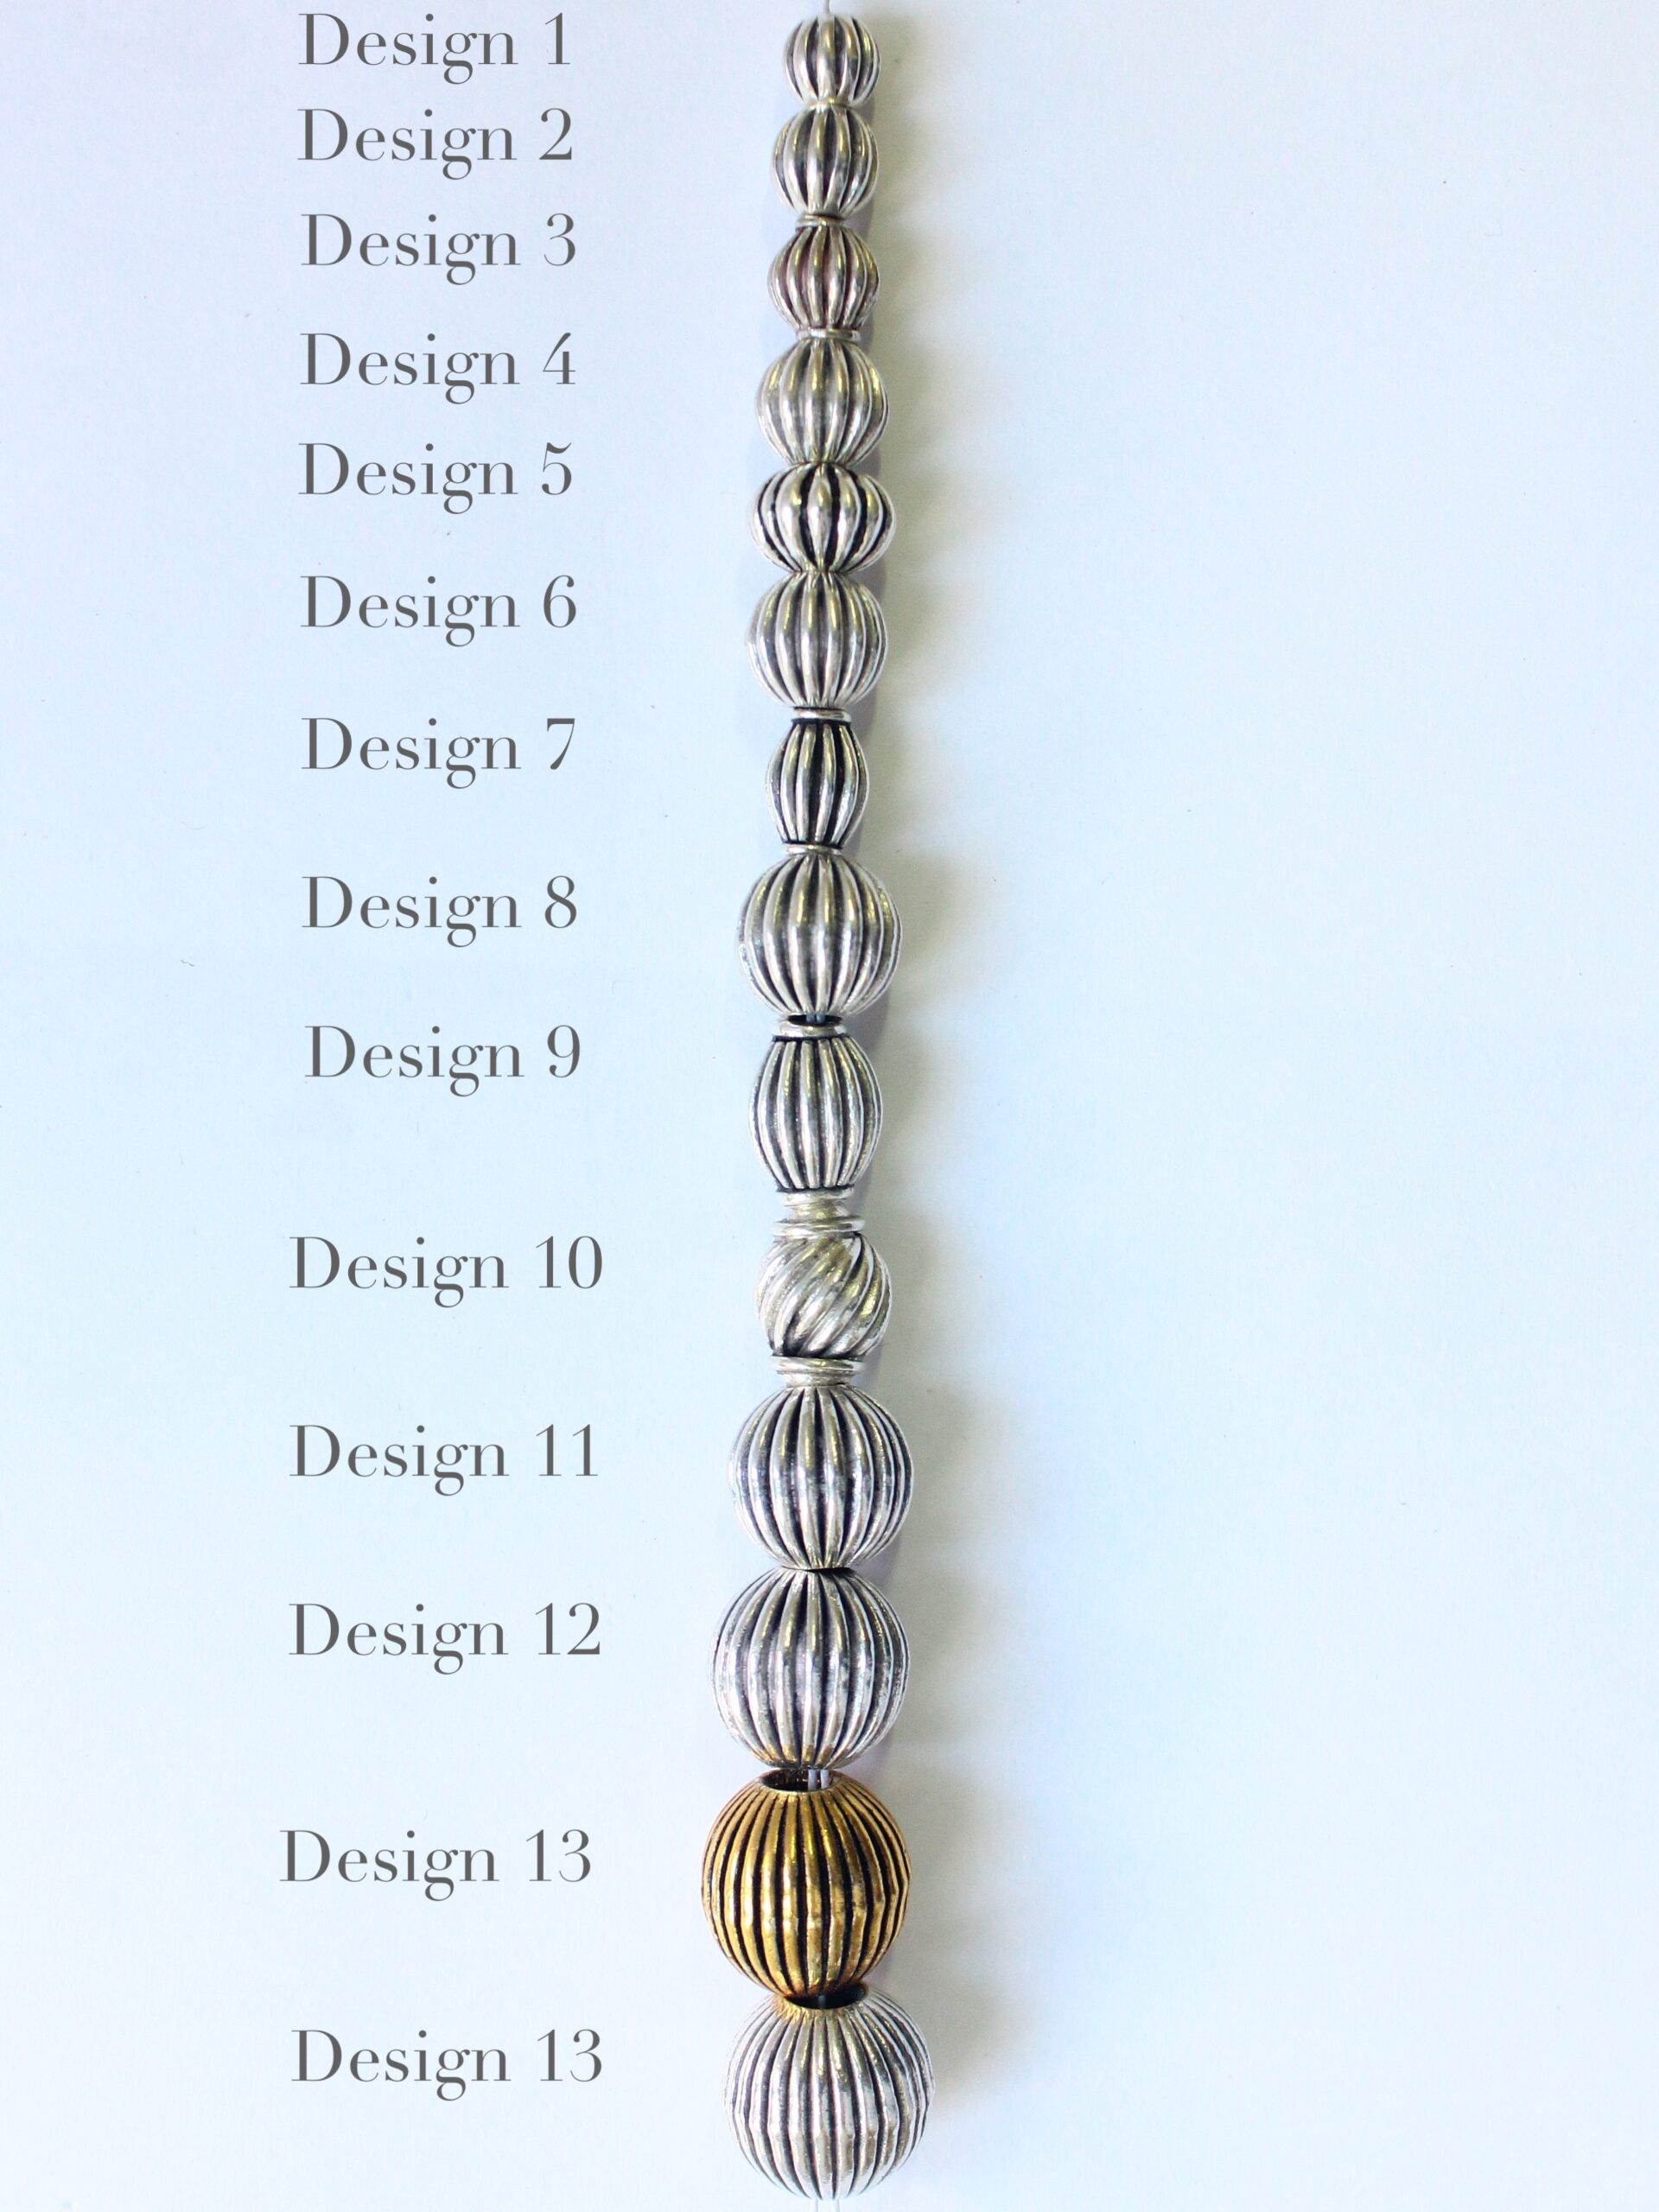 6mm Corrugated-Fluted Round Beads, 14K Gold Filled Beads (10 Pieces)